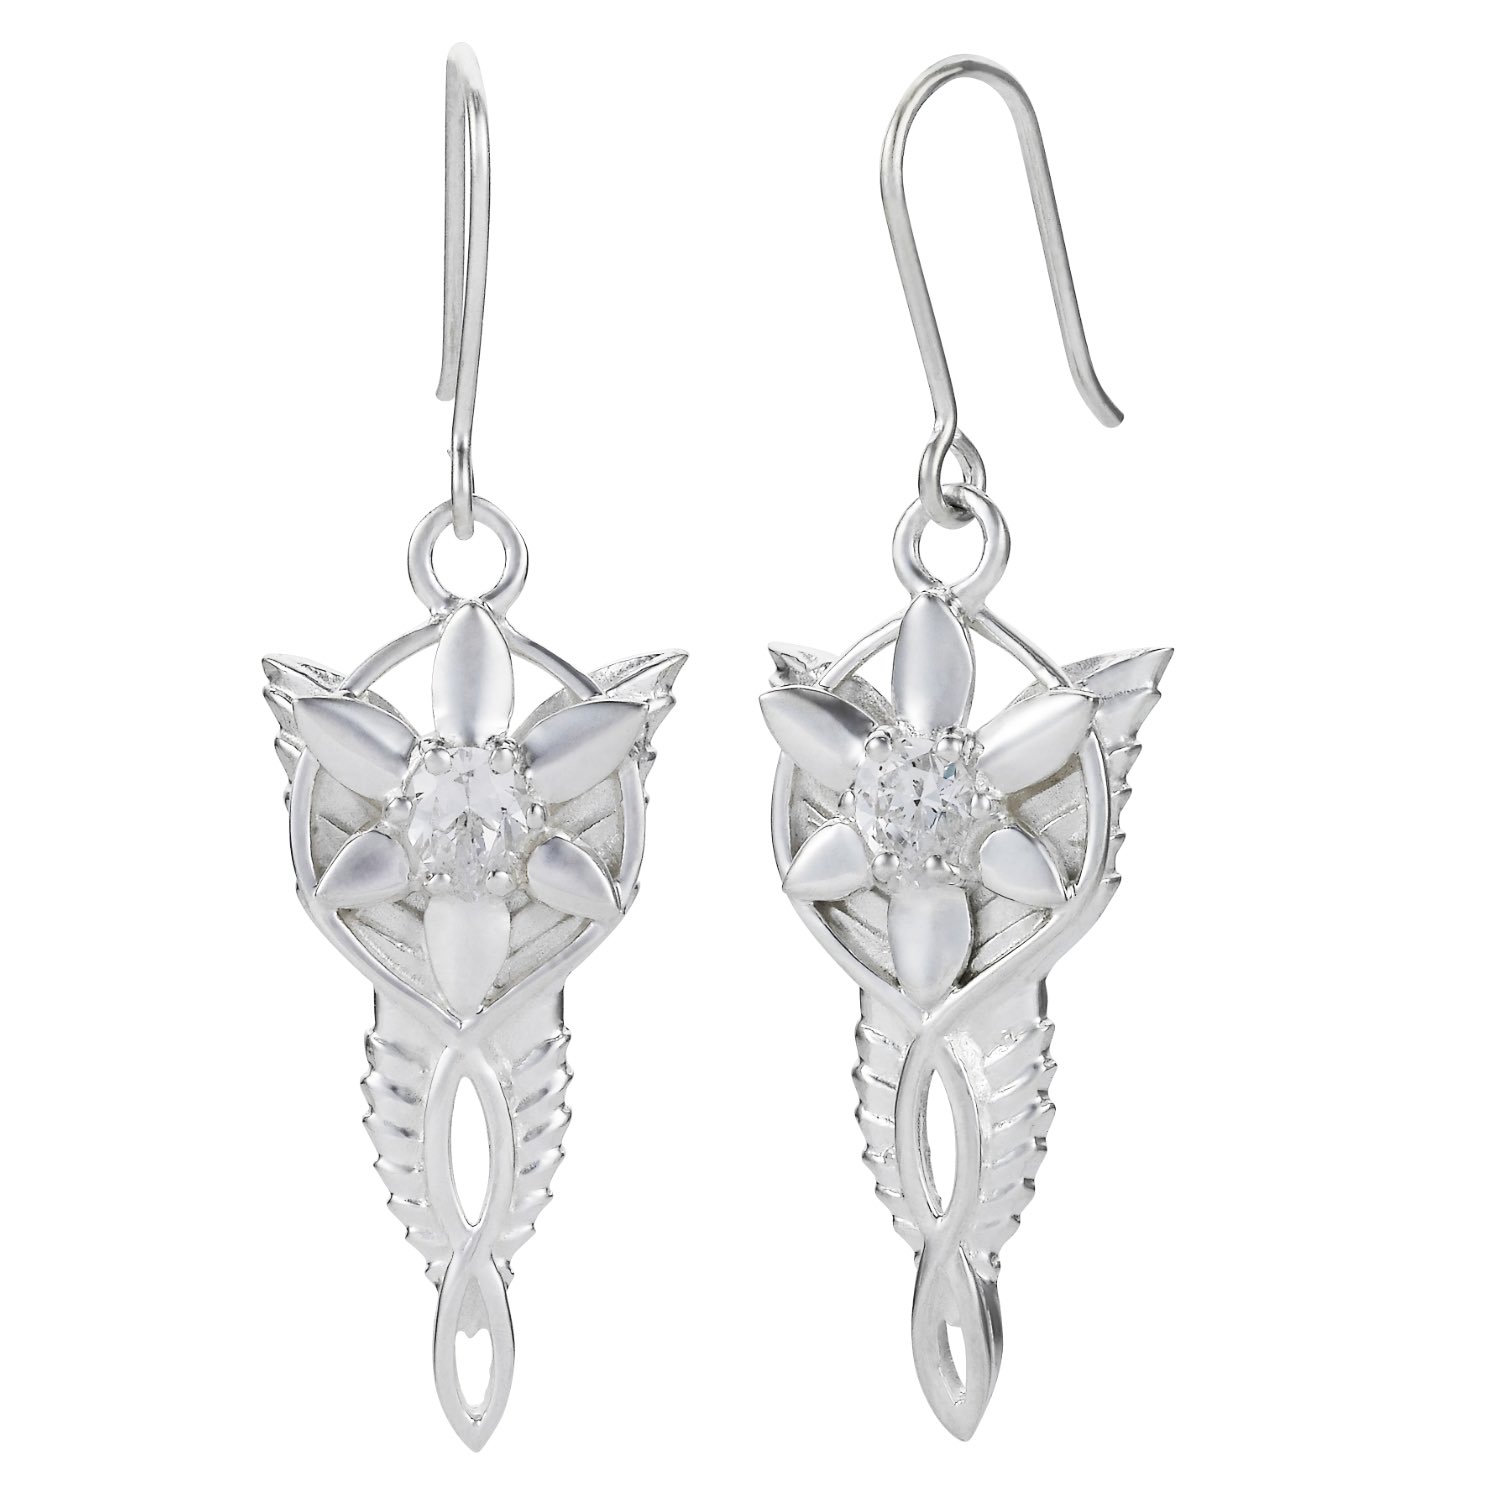 Arwen gave Aragorn an Evenstar necklace to symbolise her love and commitment to him. The Evenstar was a beautiful white gemstone that the ladies of Lothlorien traditionally wore, and it was said to bring hope and comfort to those who wore it.